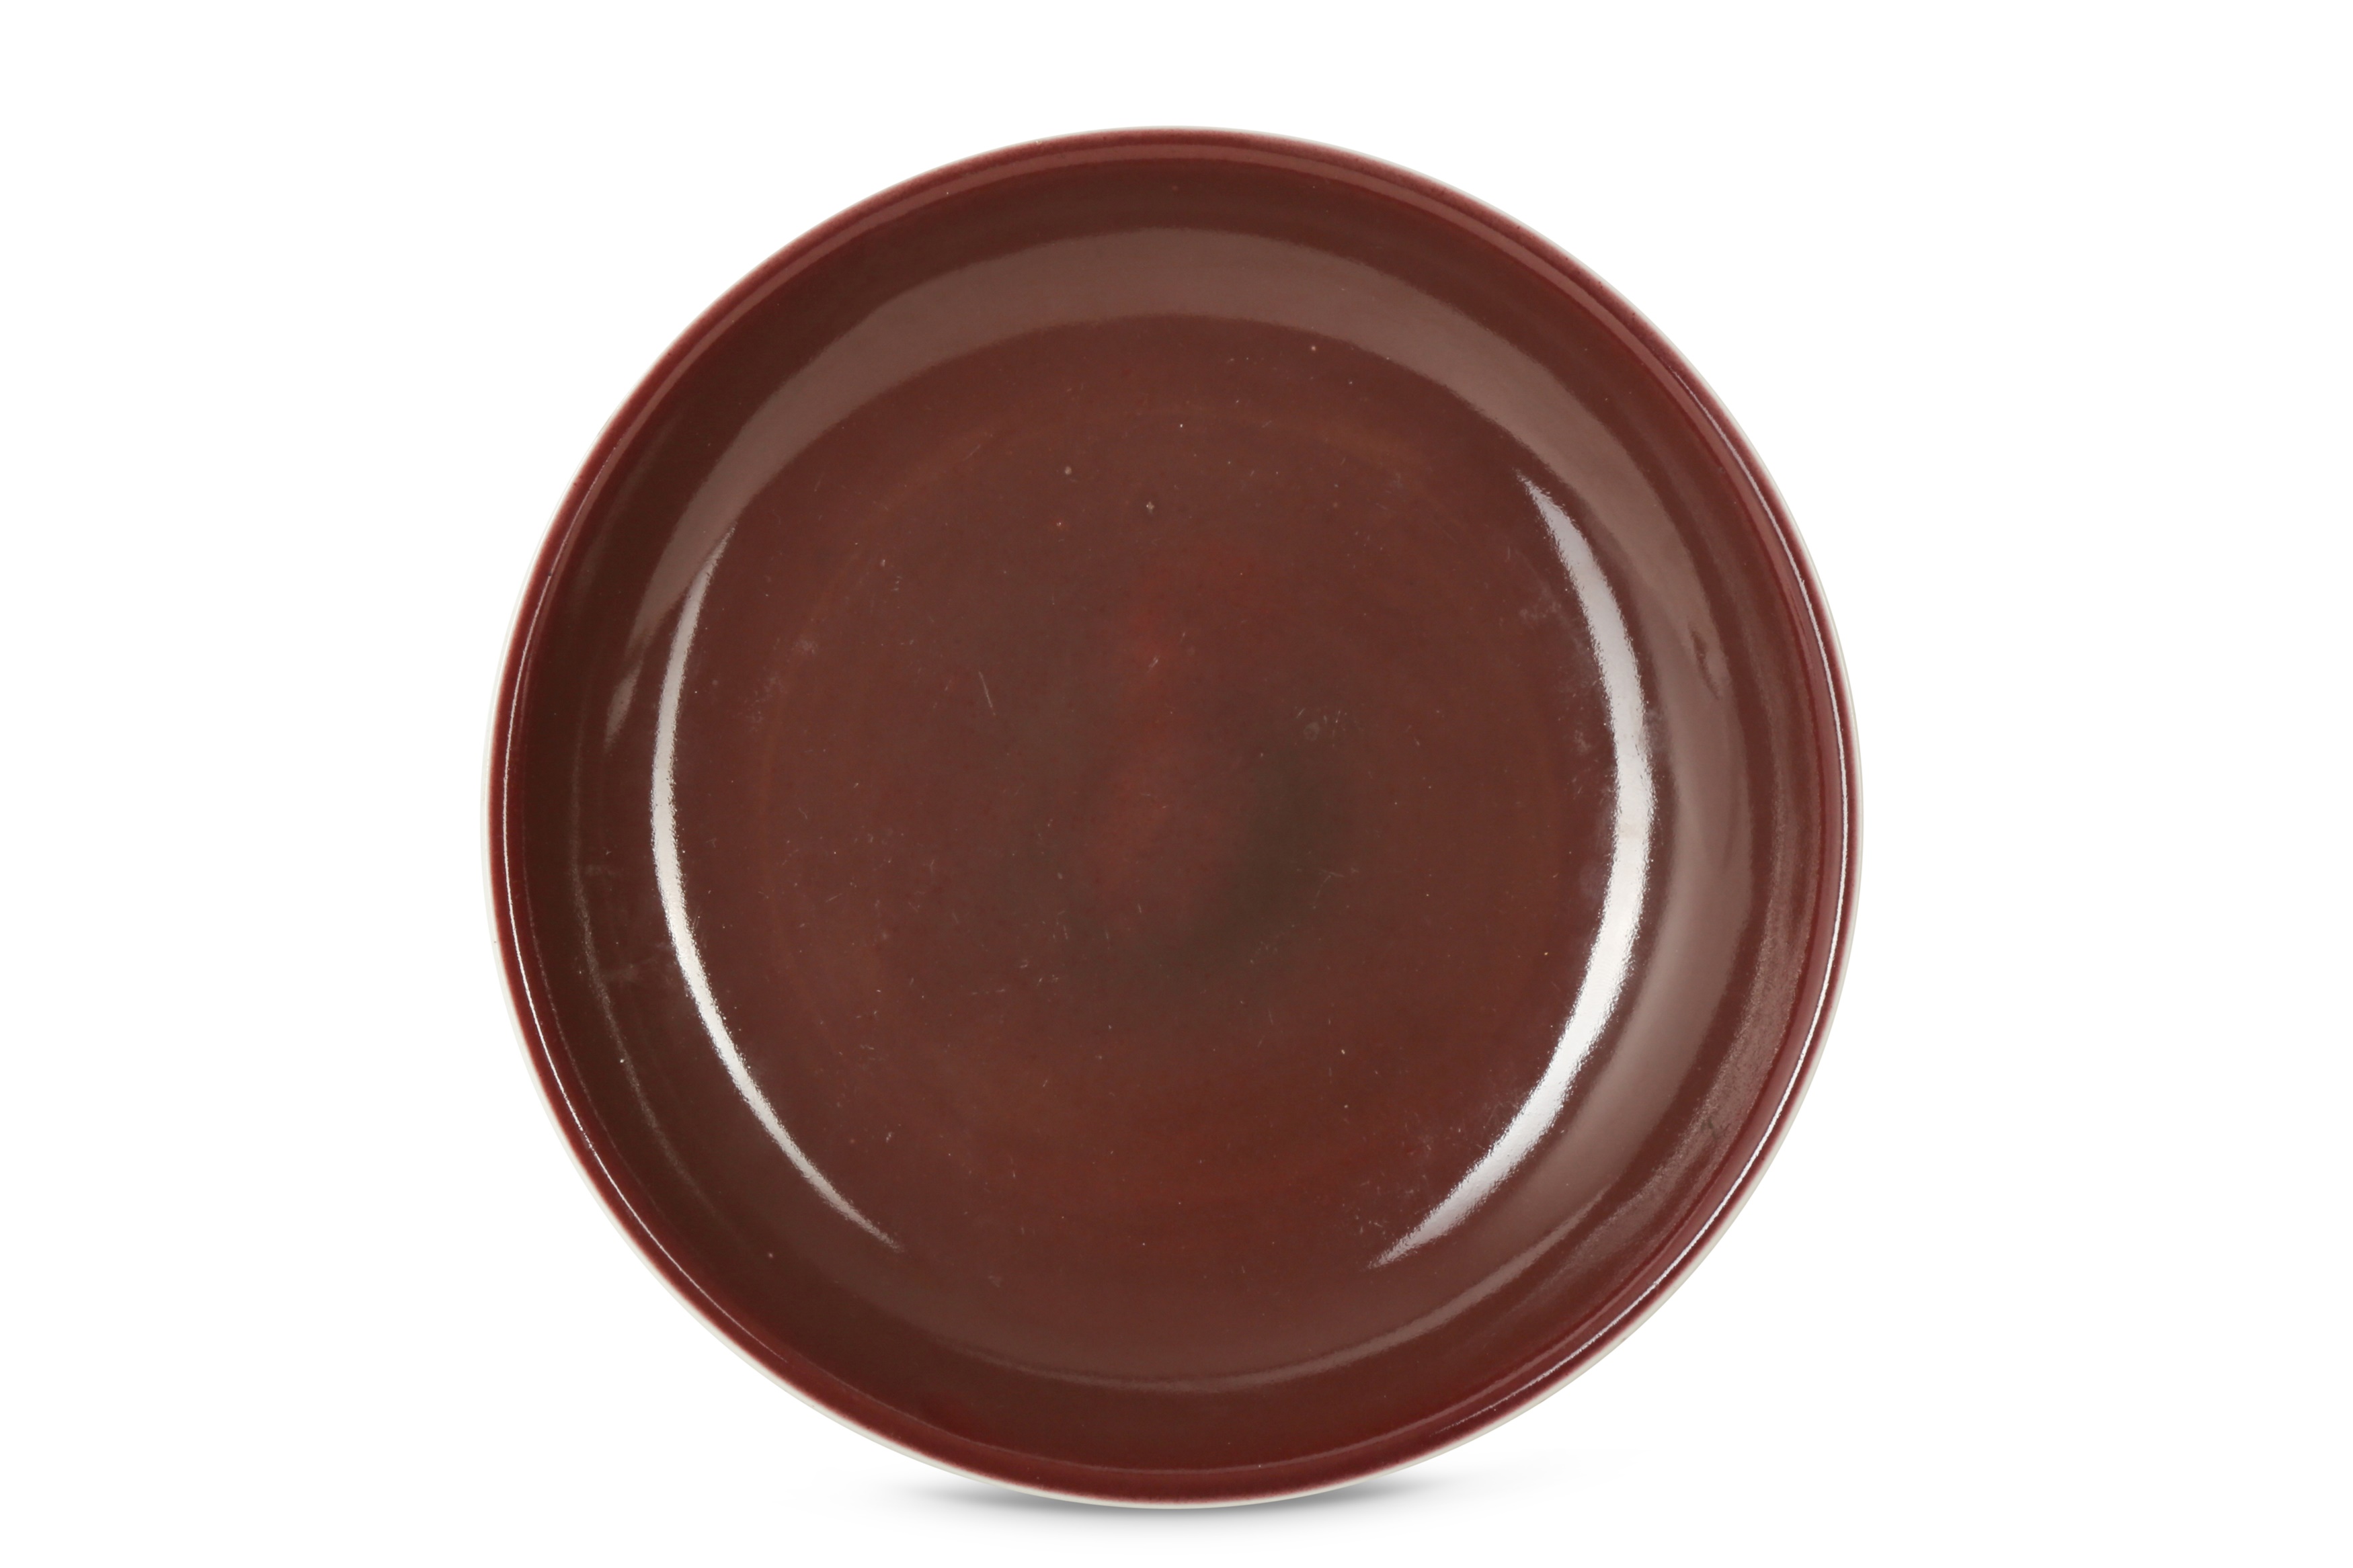 A CHINESE COPPER RED-GLAZED DISH.